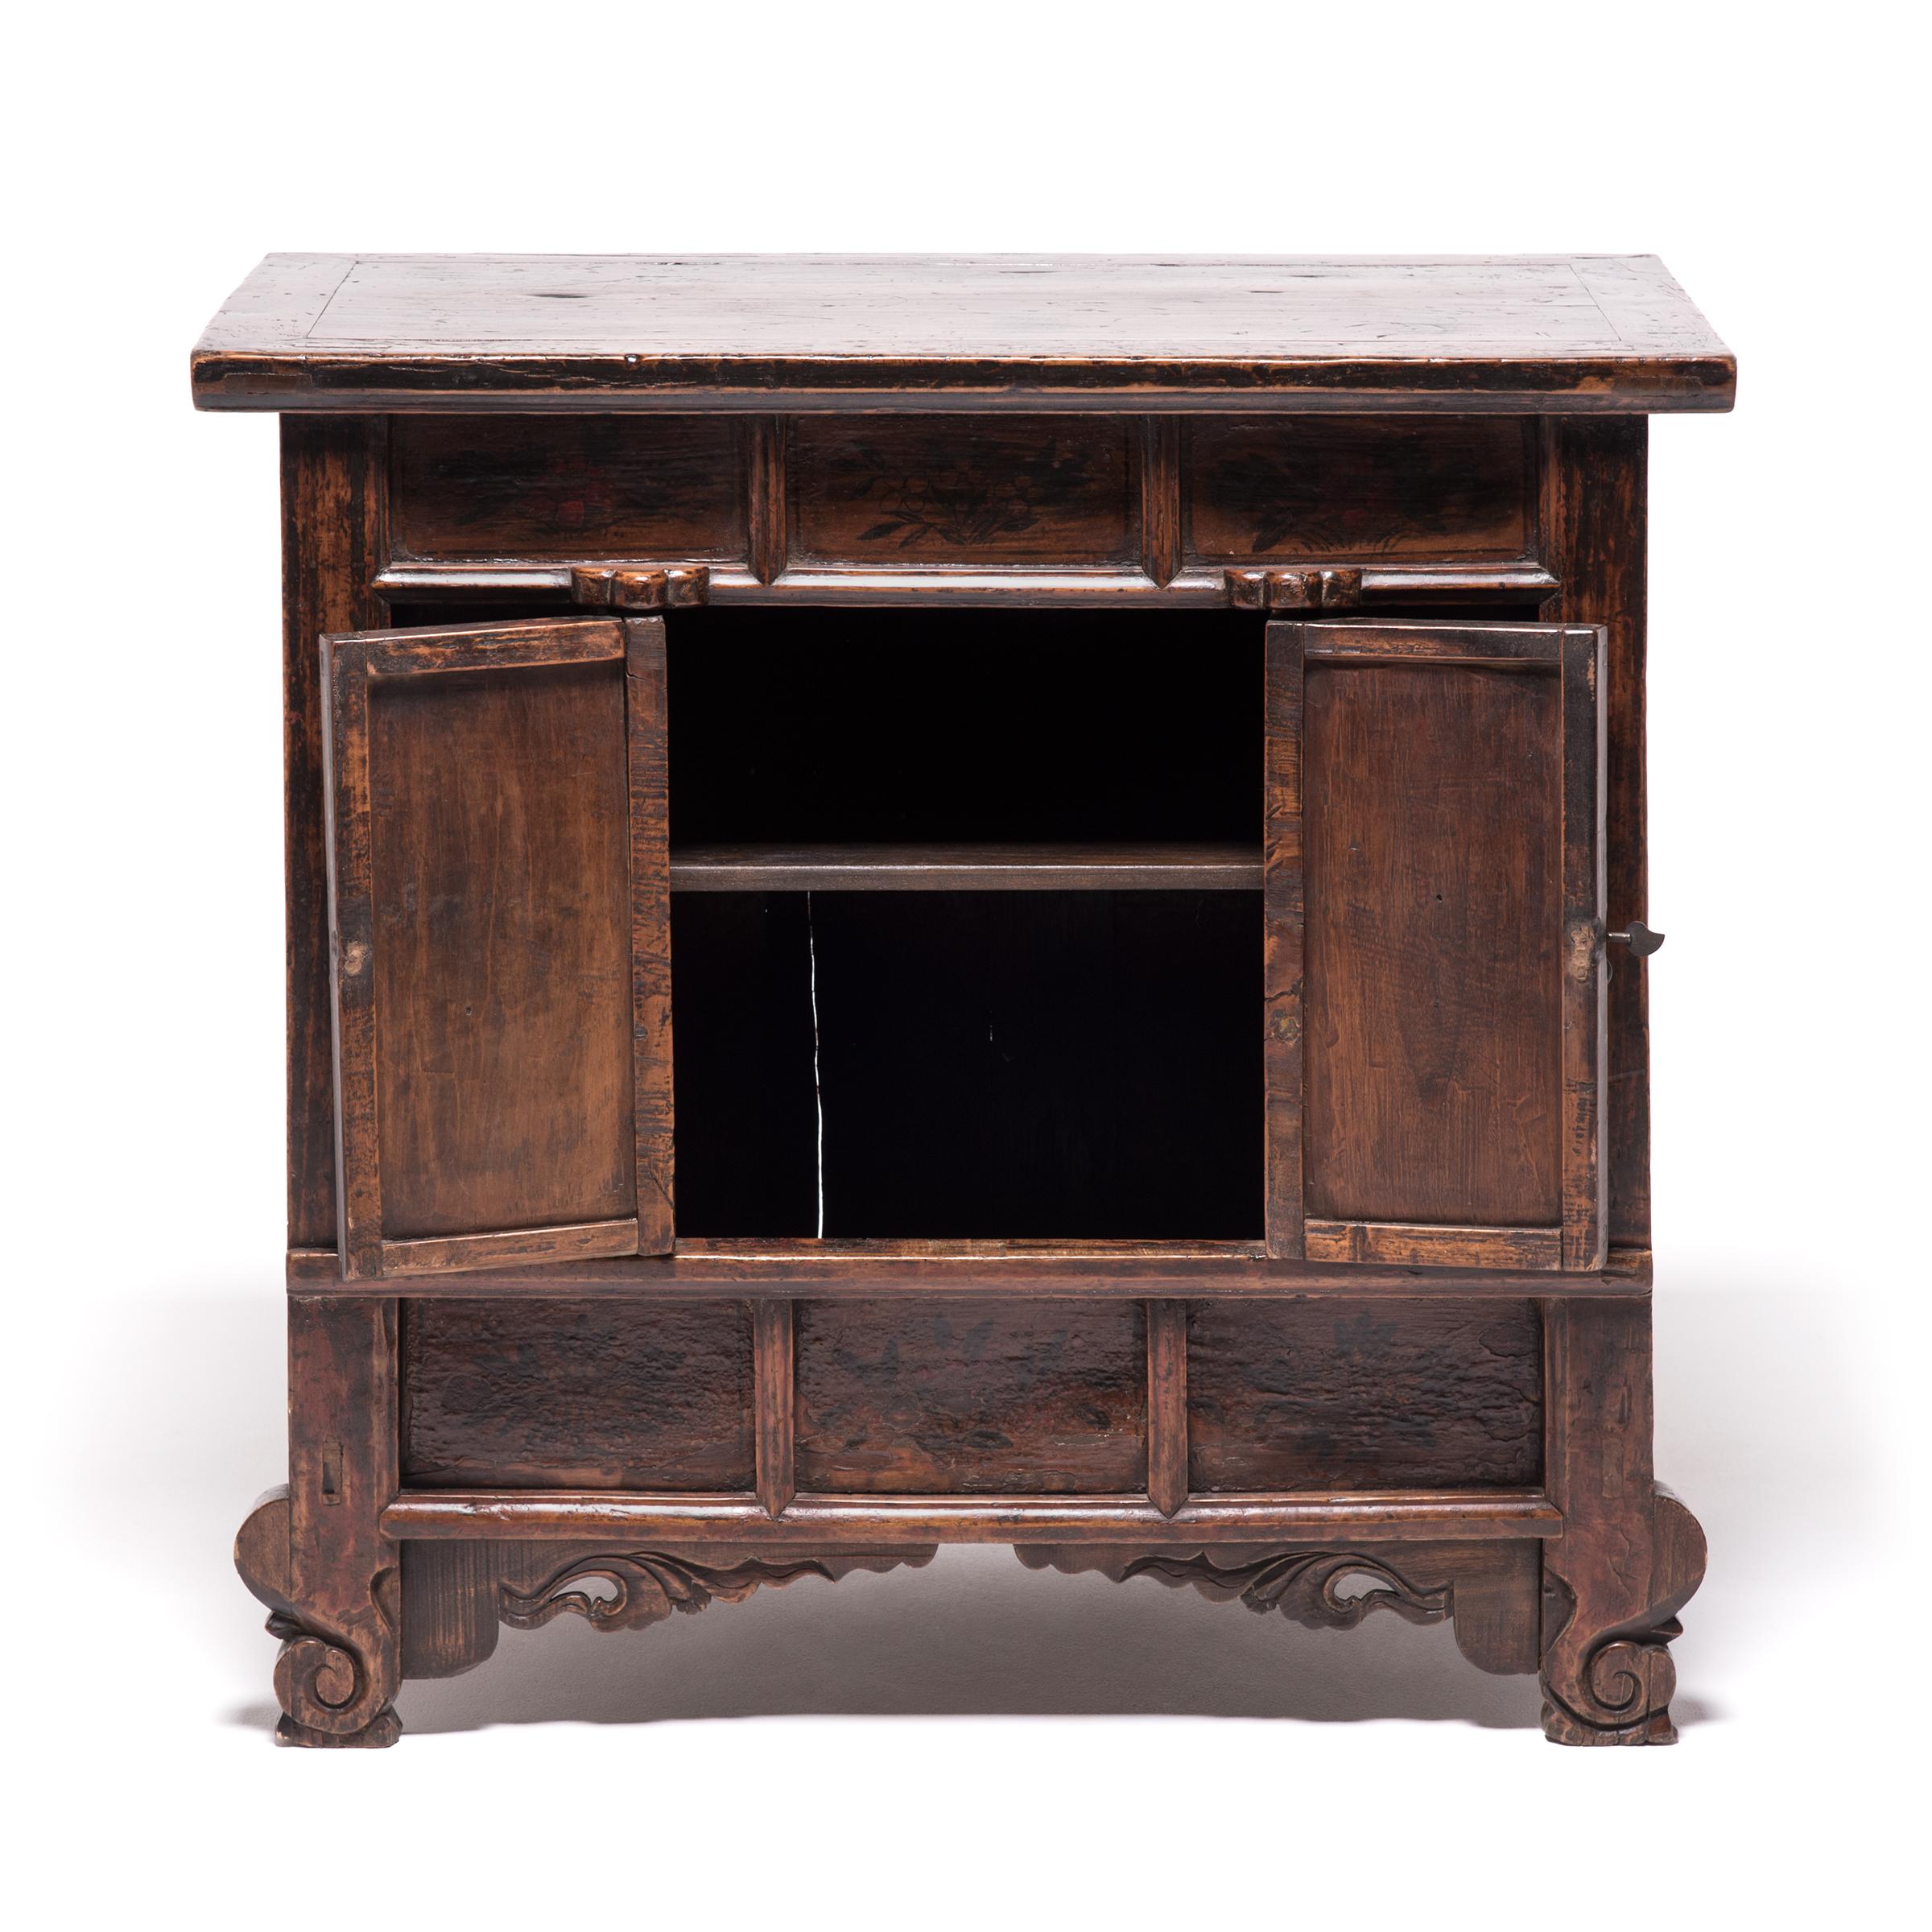 This Provincial two-door cabinet from China's northwest Gansu province is typical of the area's cabinet design during the late 19th century but the paneled front and overall form references styles from the Song dynasty thousands of years earlier.